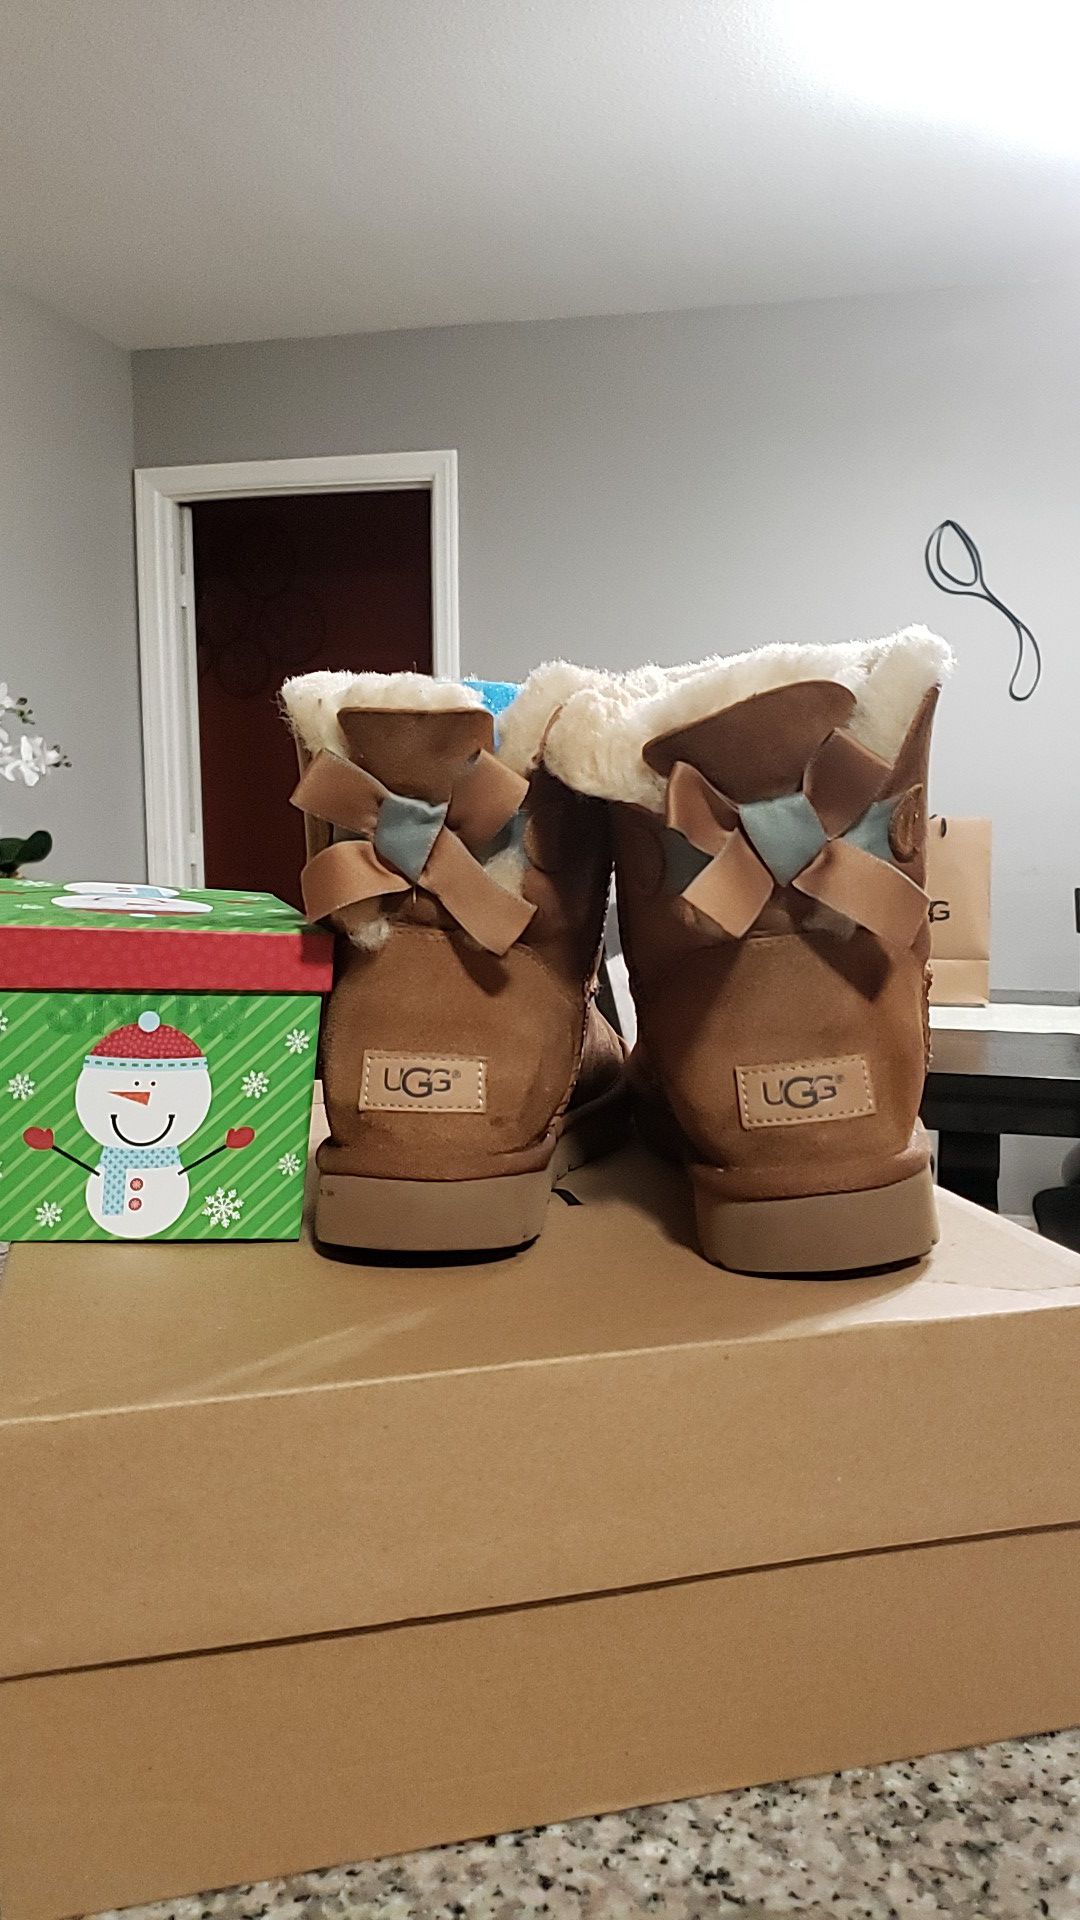 Authentic UGG Baily bow size 8 runs big